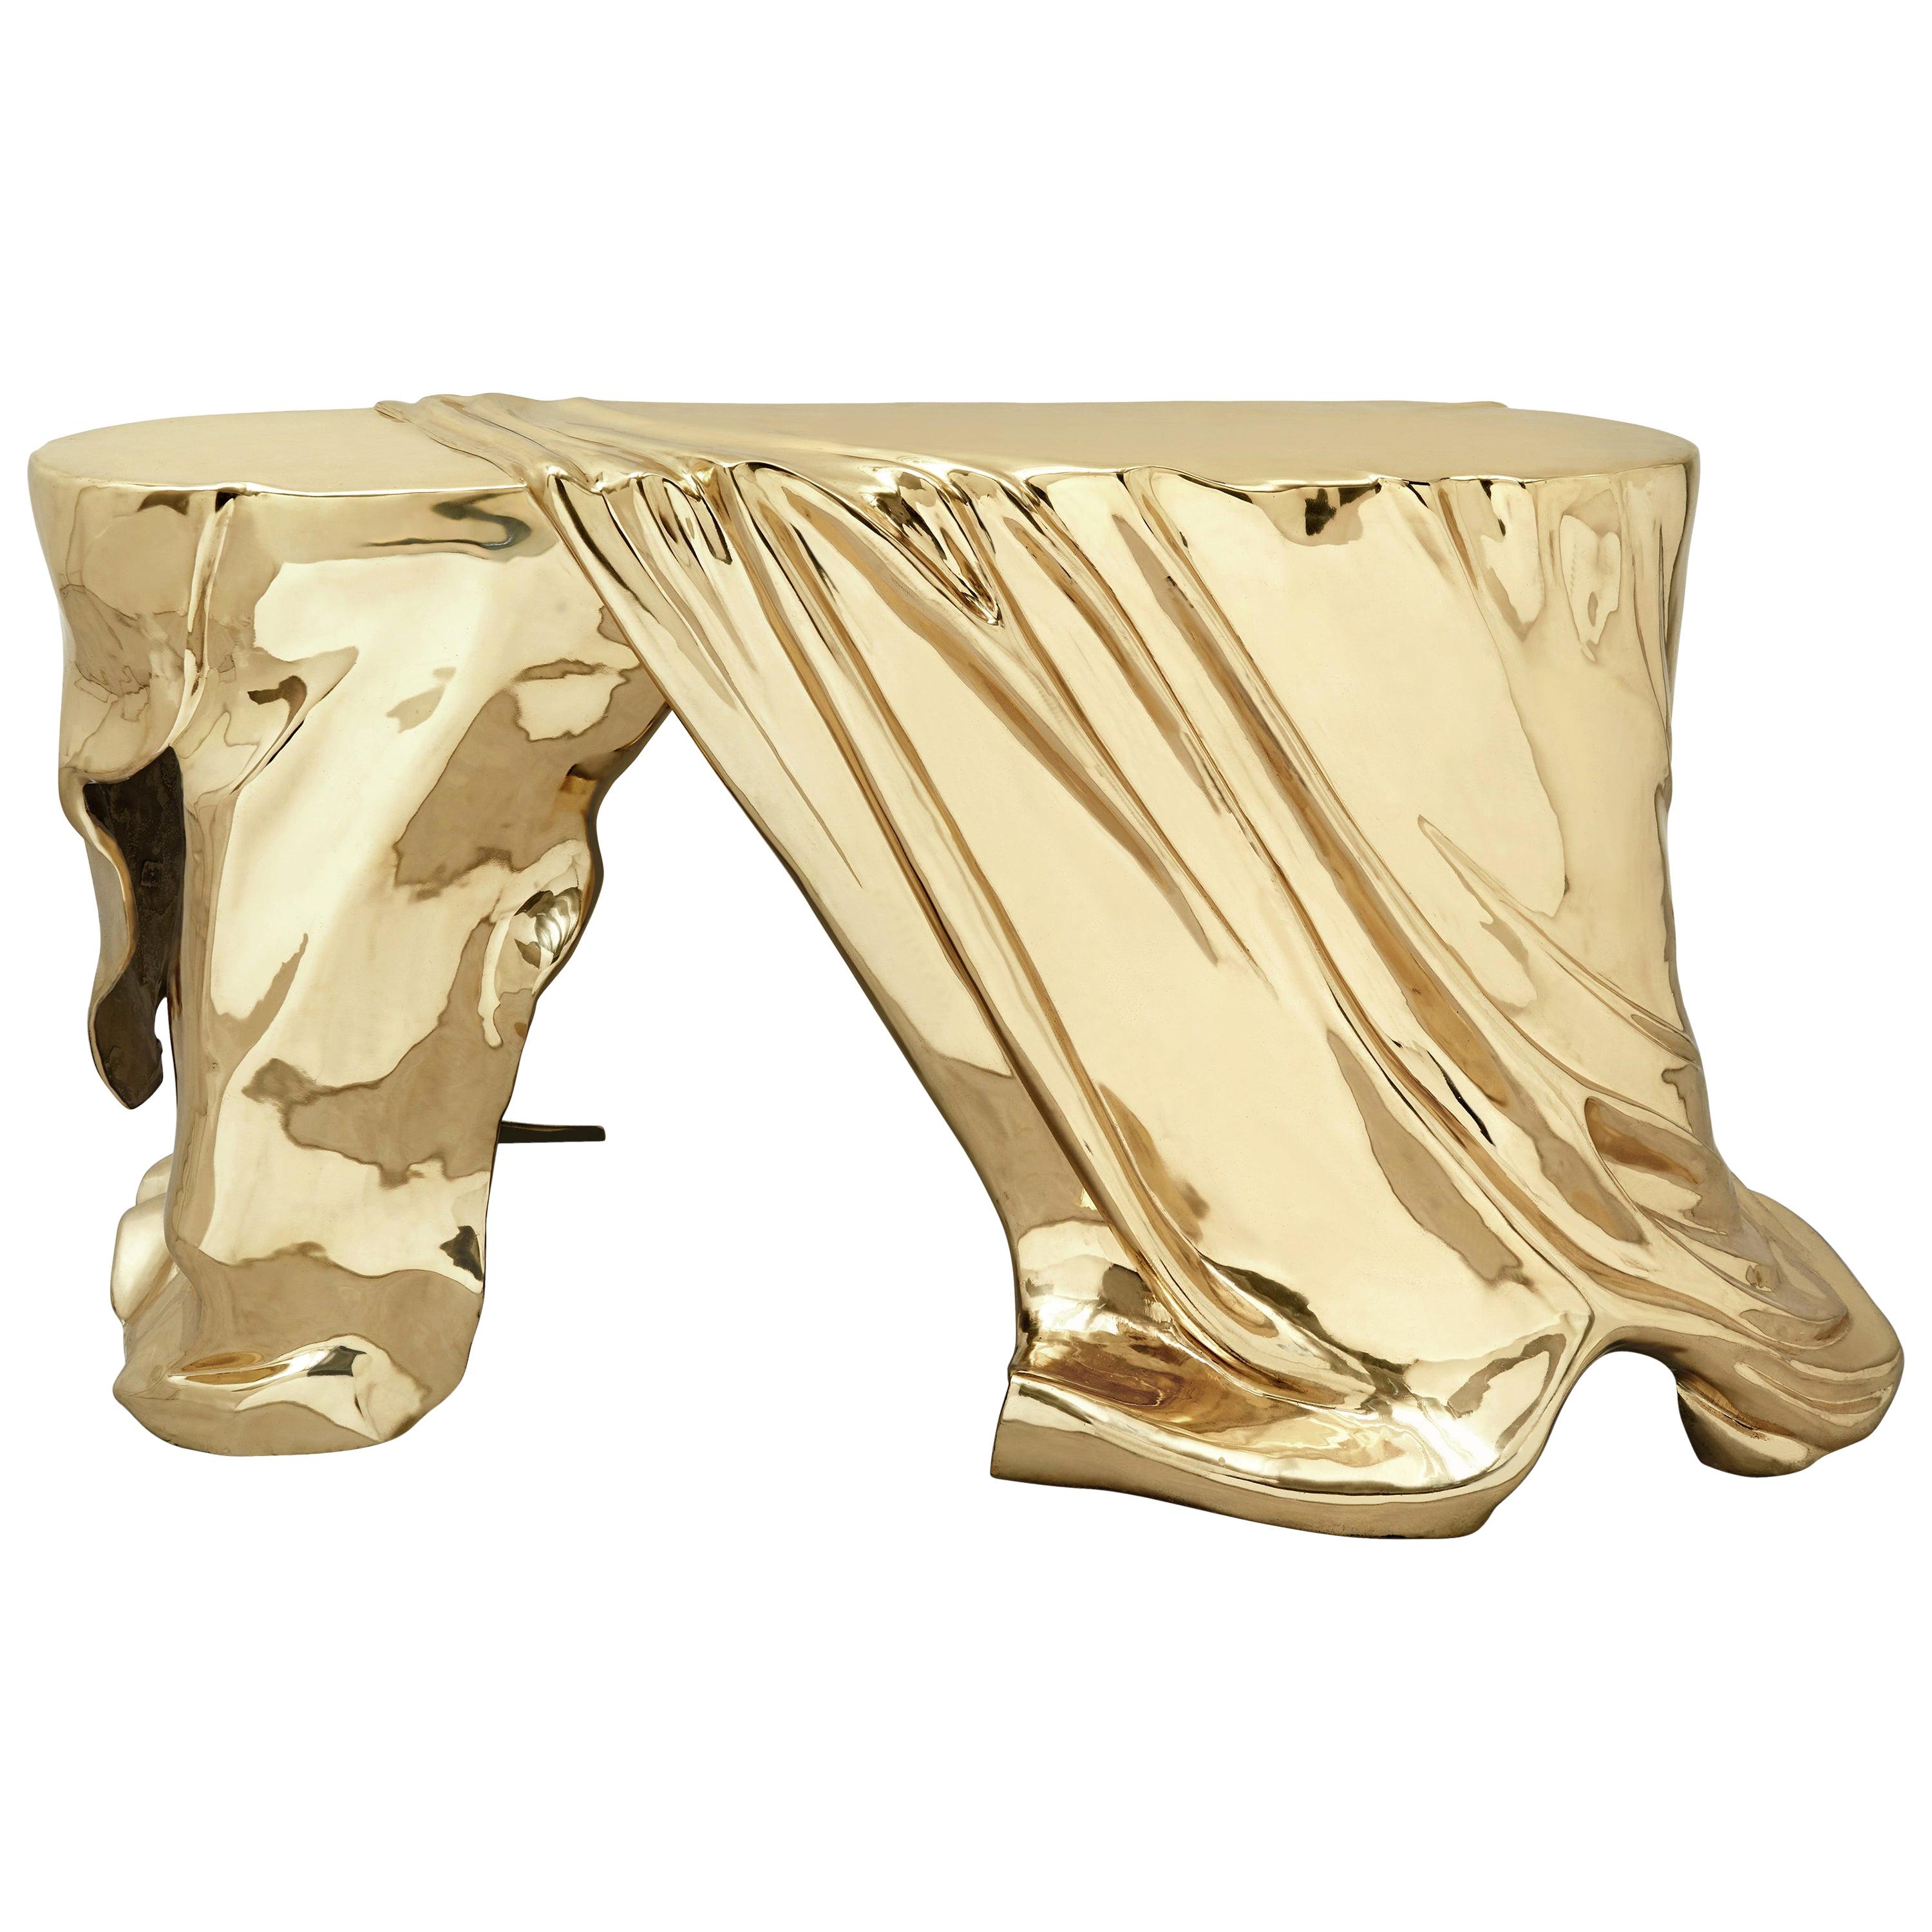 "Phantom Table" Polished Brass Console Table Entry Table by Zhipeng Tan